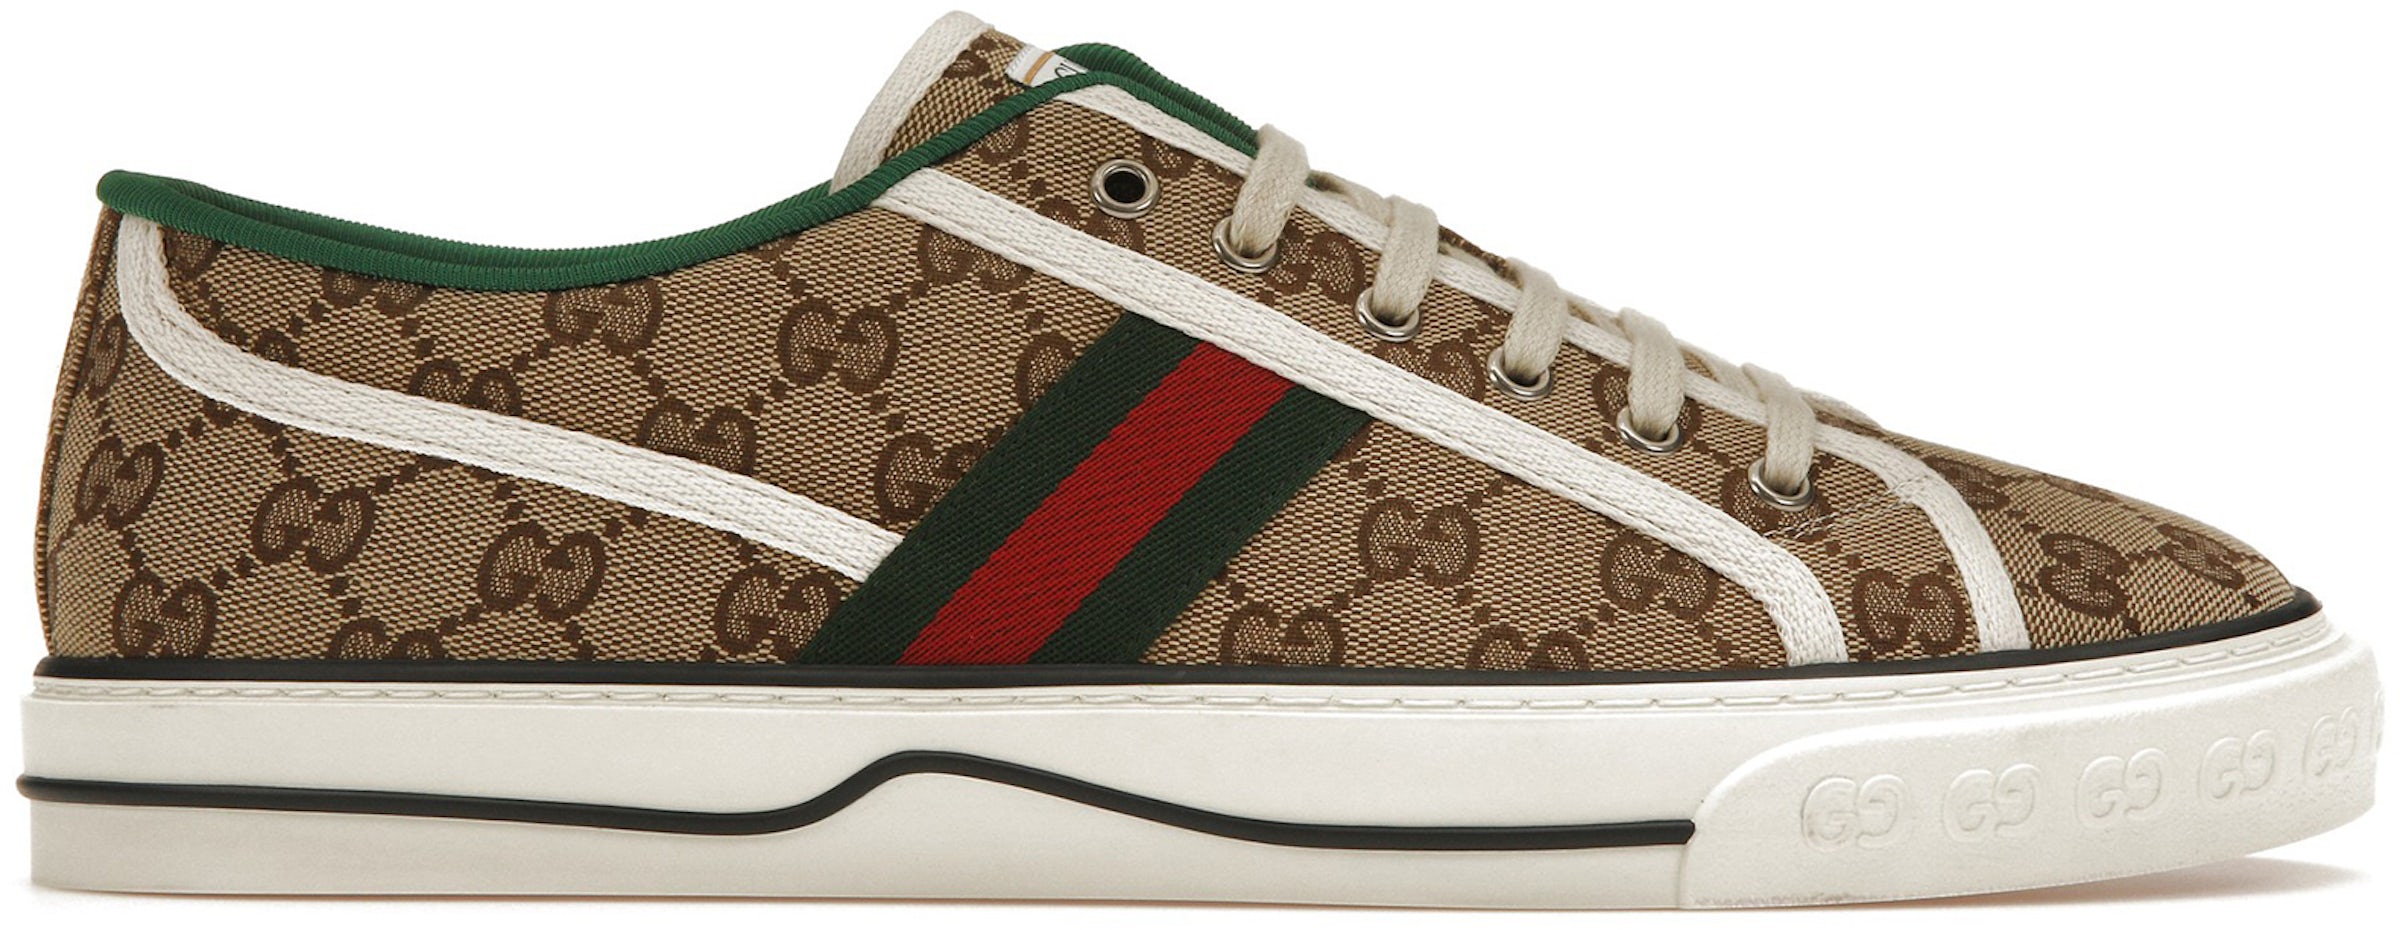 32 Gucci Ace ideas  gucci ace sneakers, gucci sneakers outfit, gucci  sneakers